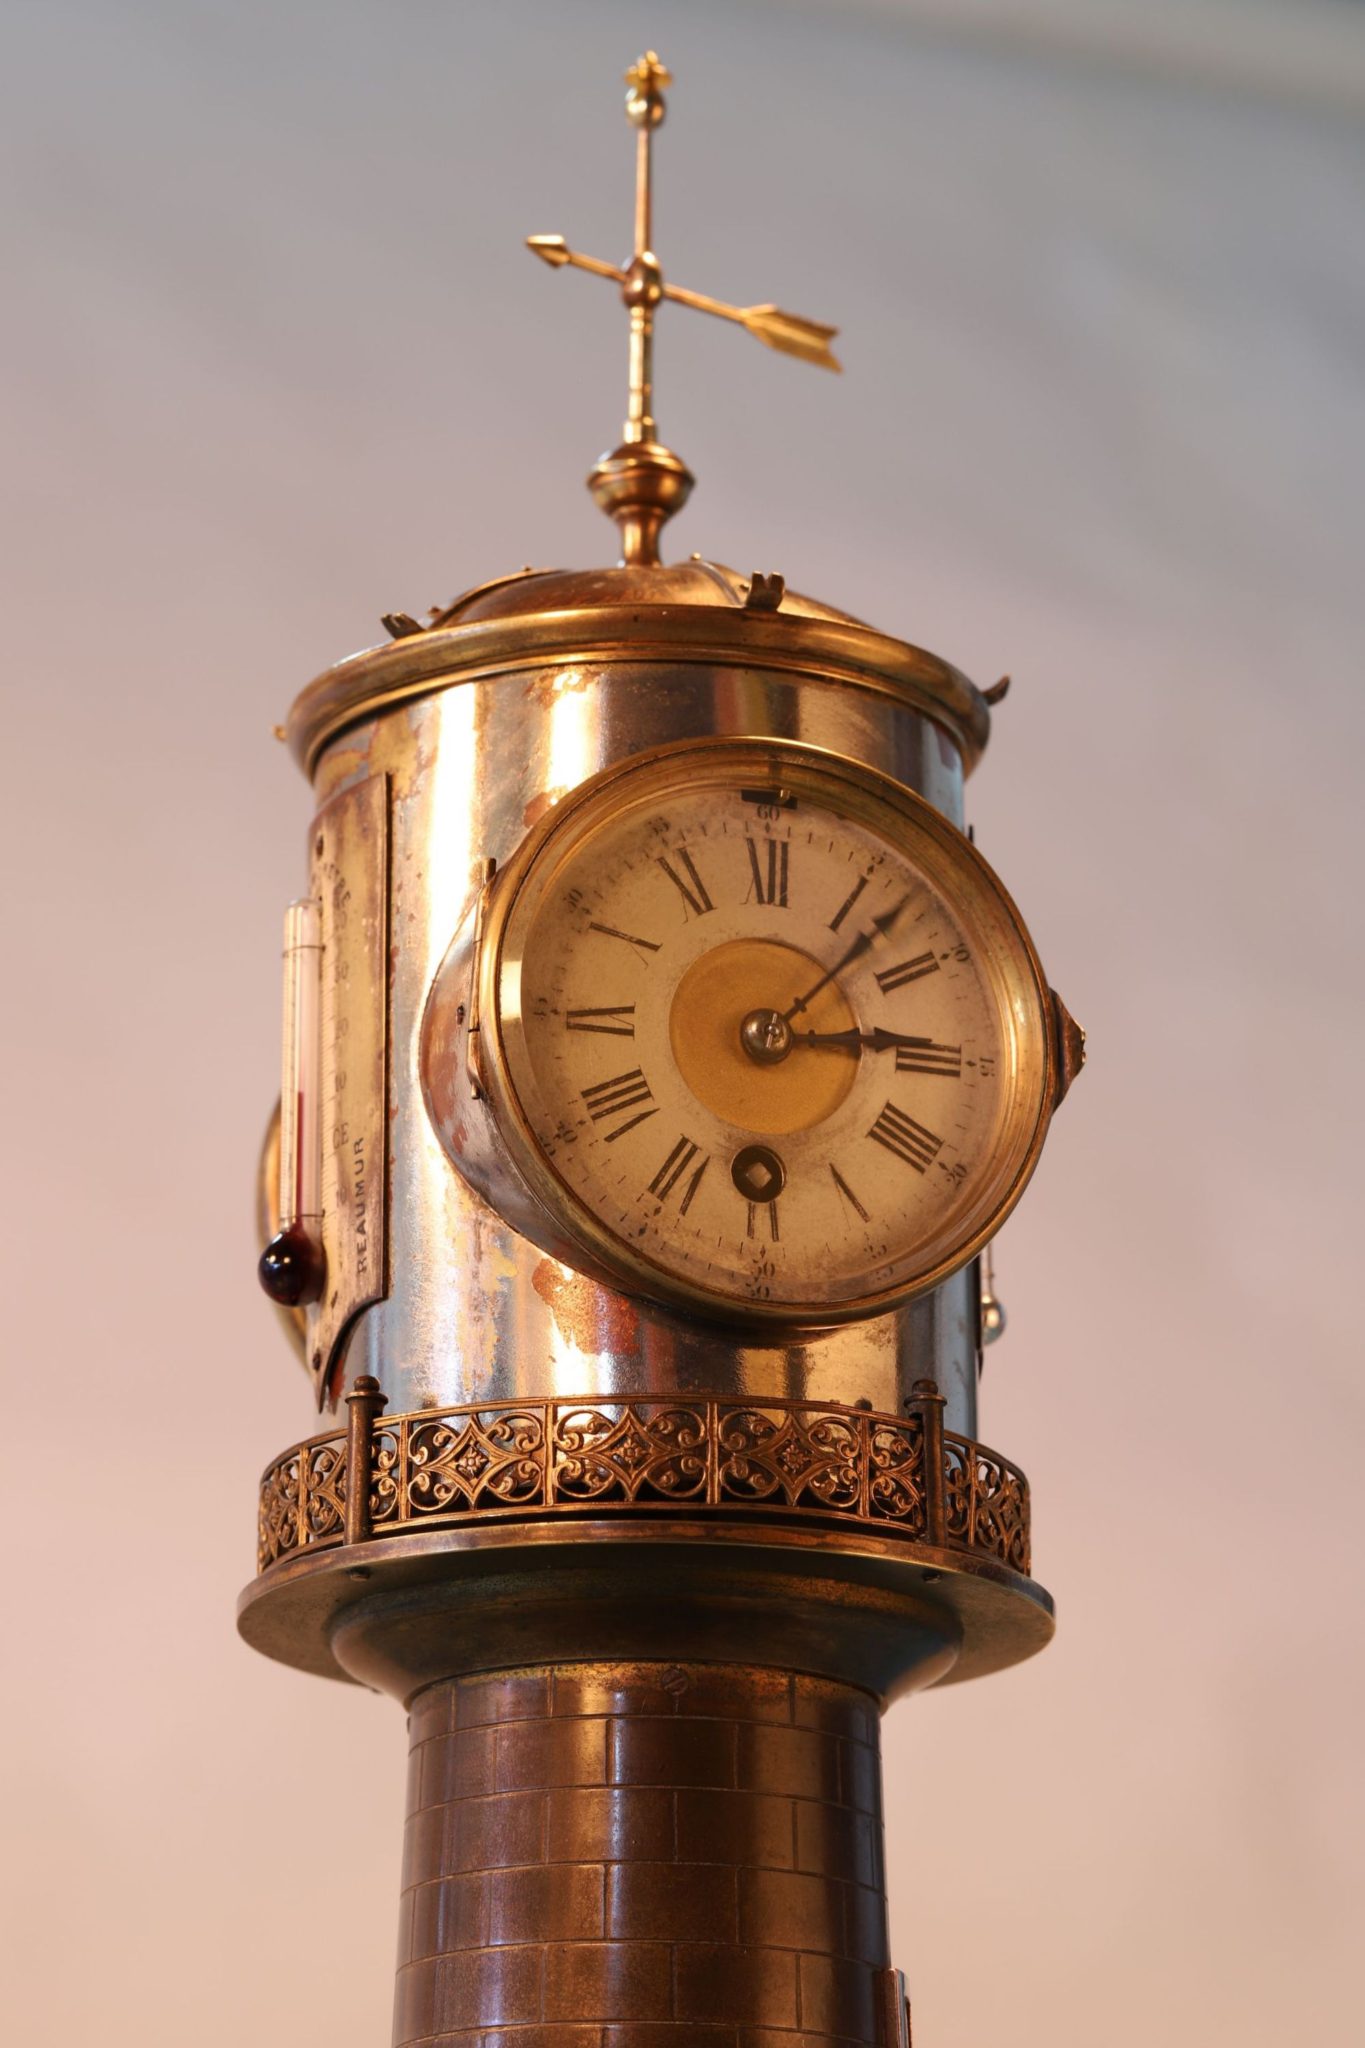 ANTIQUE FRENCH LIGHTHOUSE CLOCK BAROMETER AUTOMATON BY GUILMET No 737 c1880